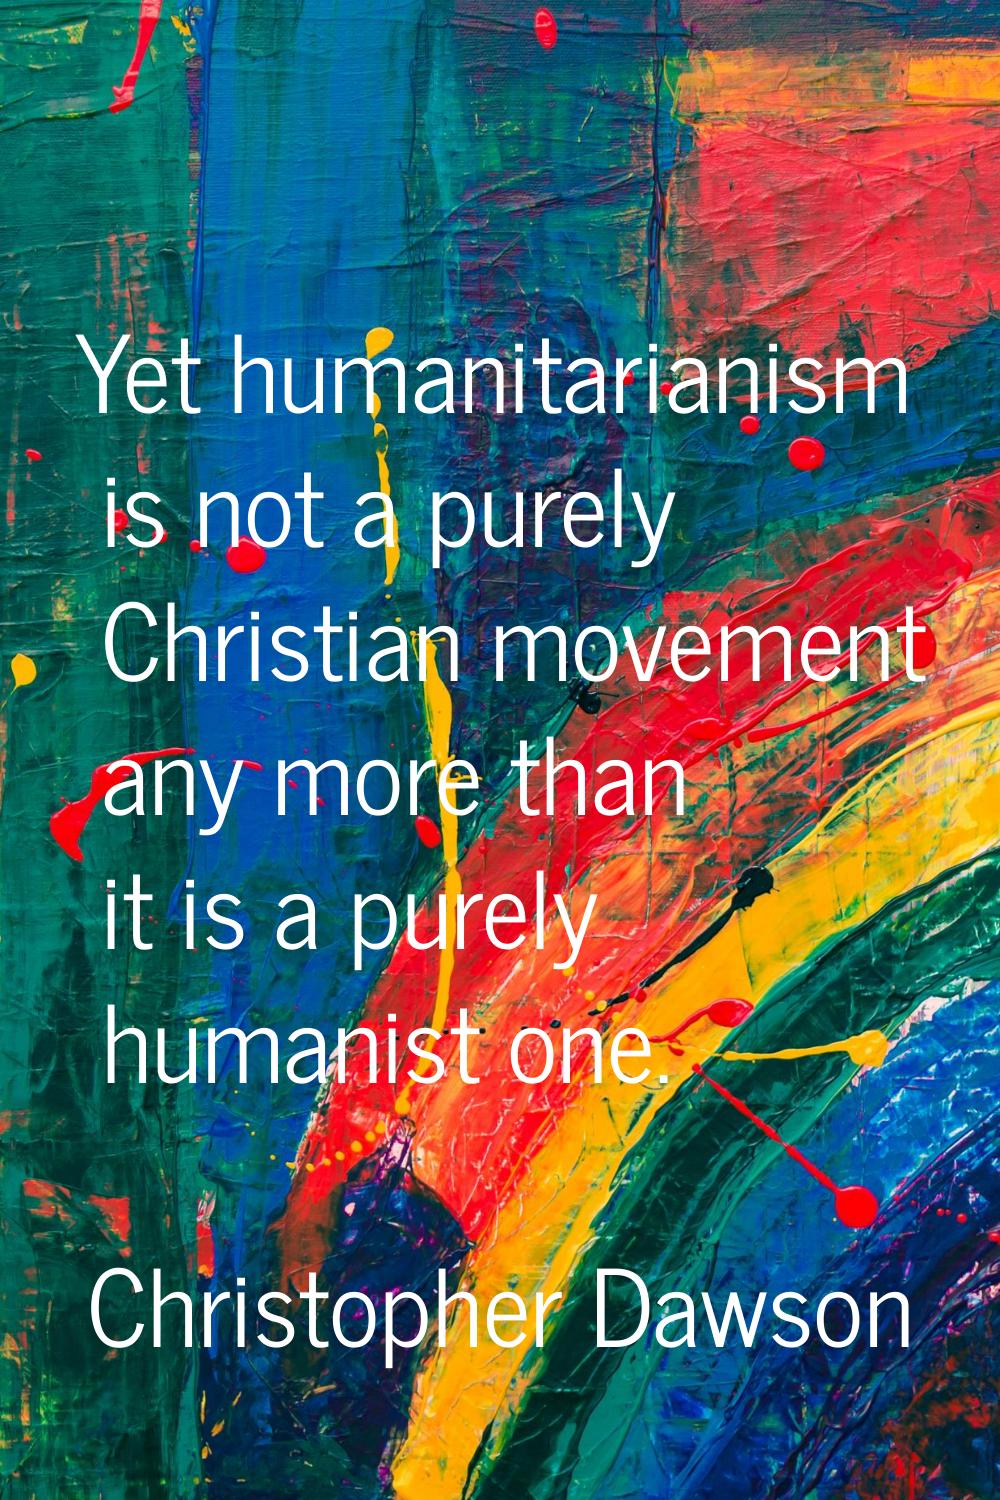 Yet humanitarianism is not a purely Christian movement any more than it is a purely humanist one.